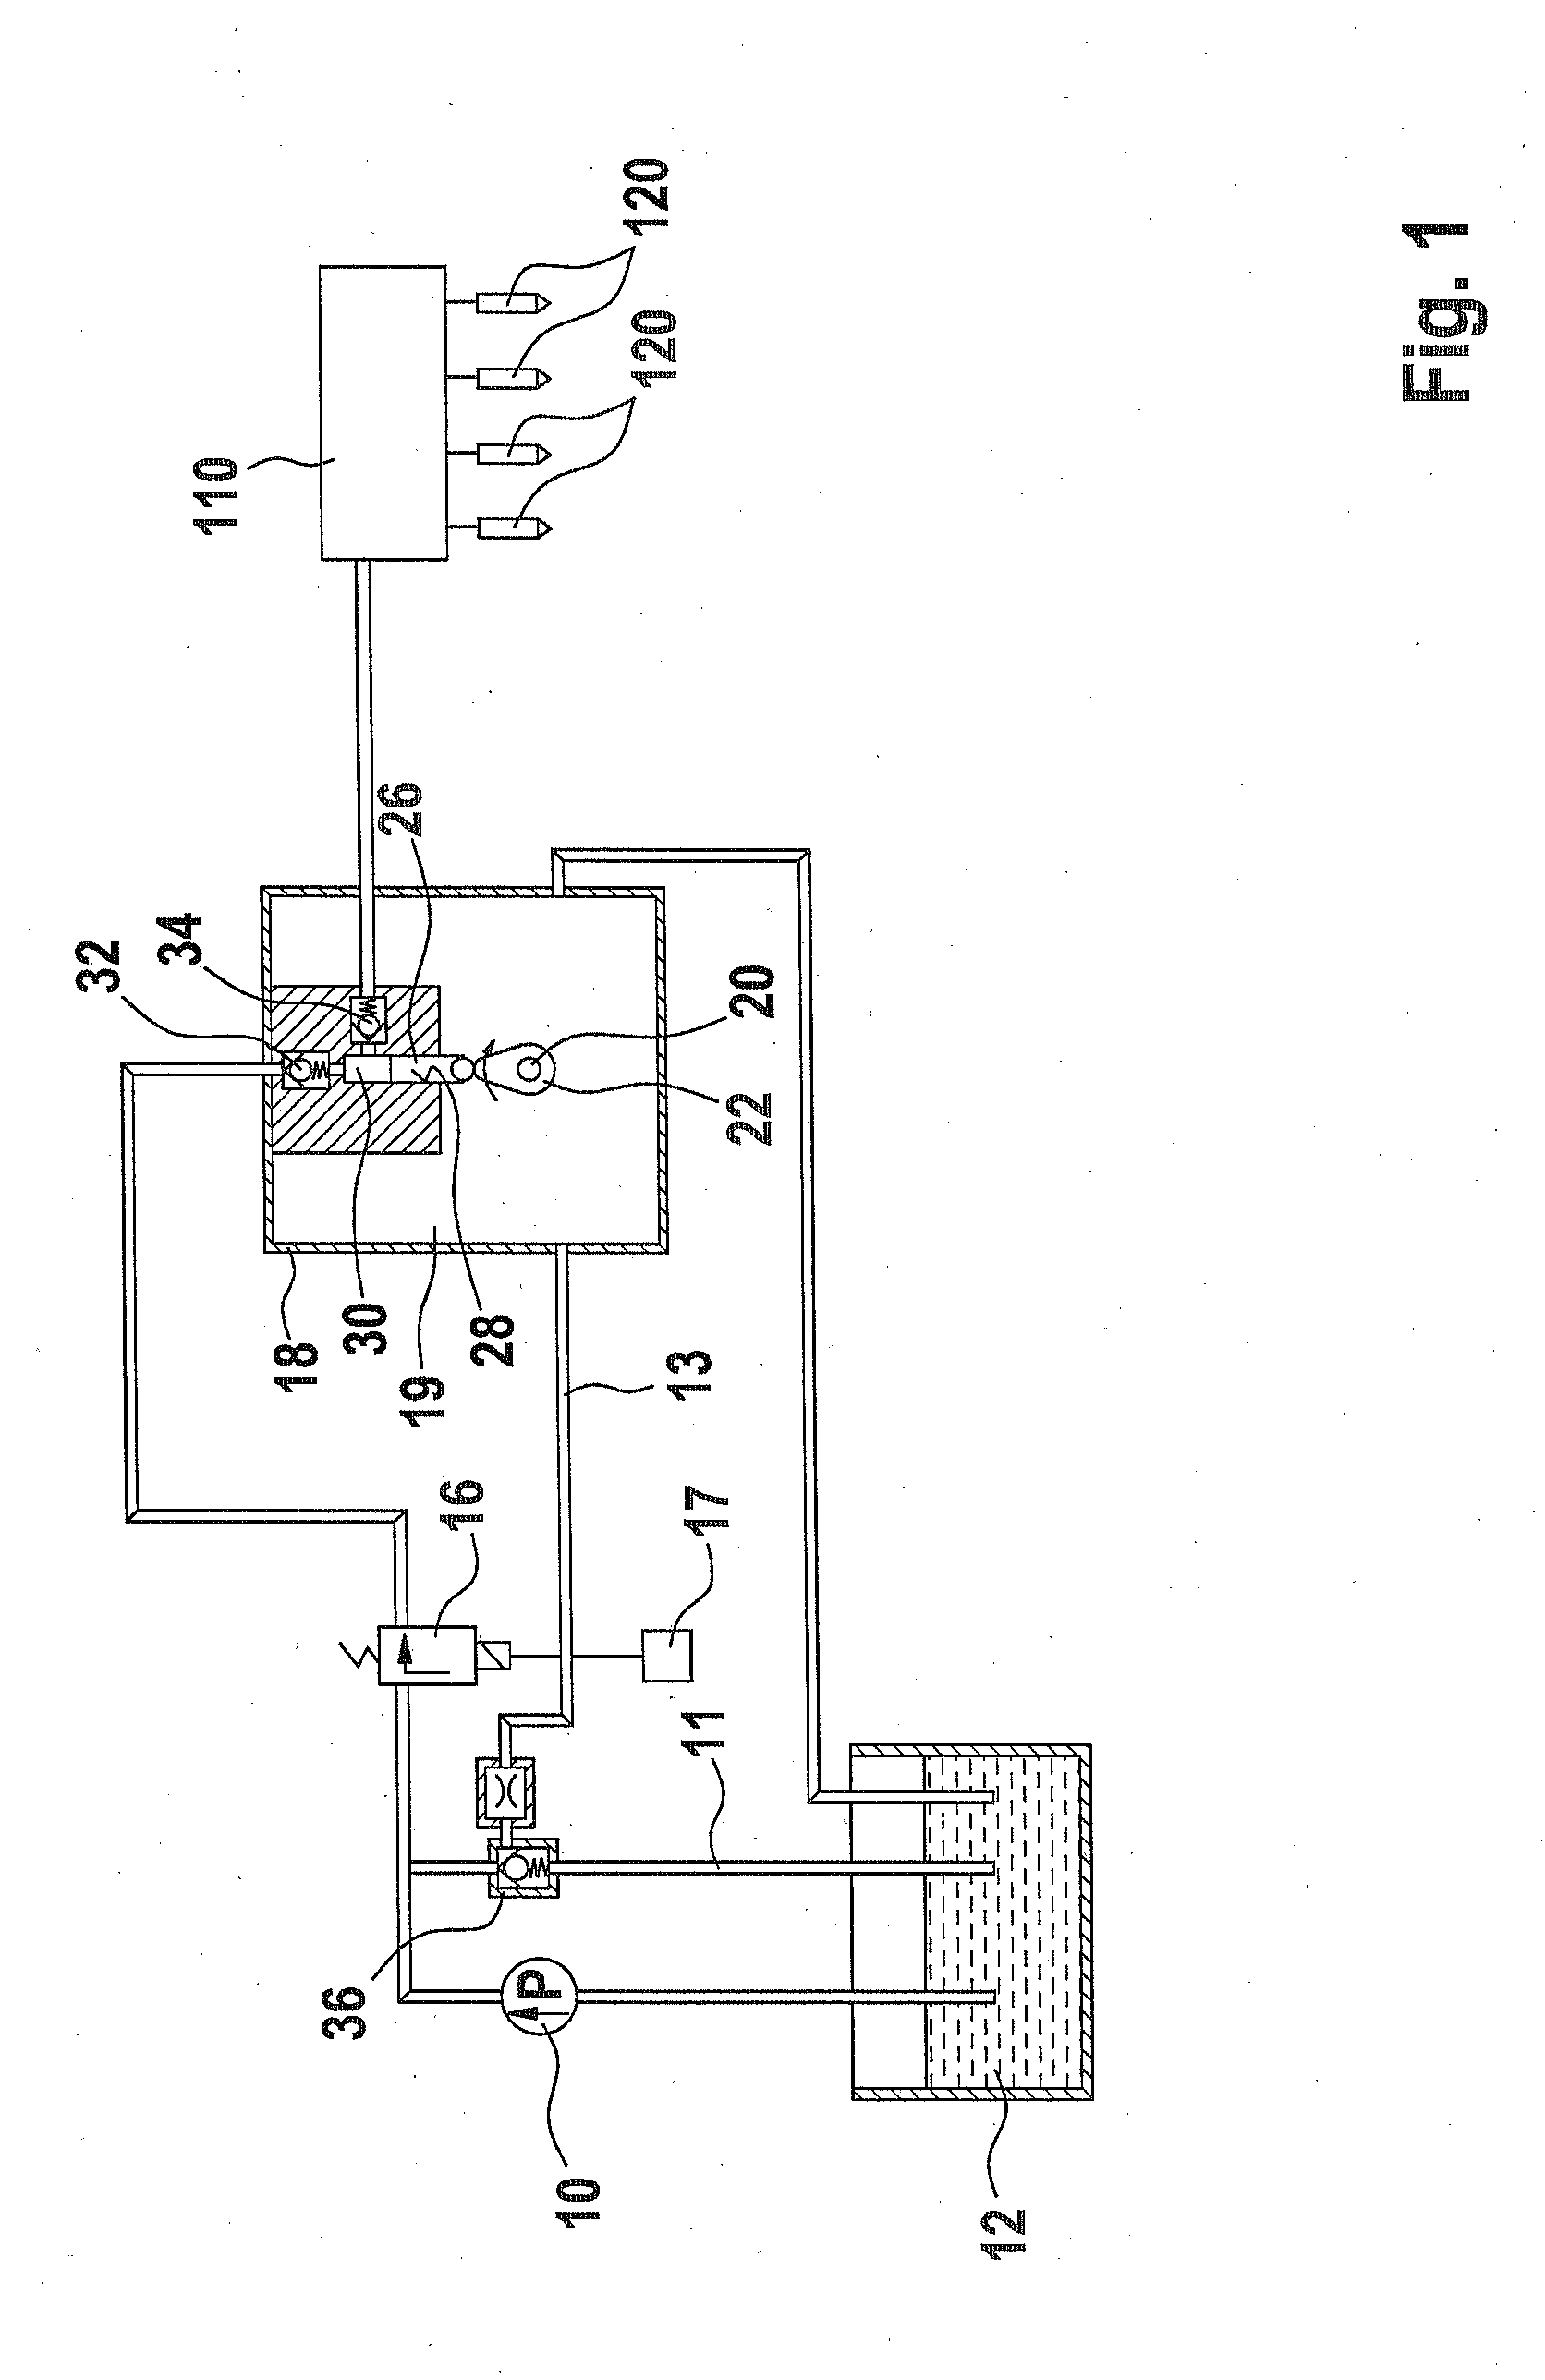 Fuel overflow valve for a fuel injection system, and fuel injection system having a fuel overflow valve